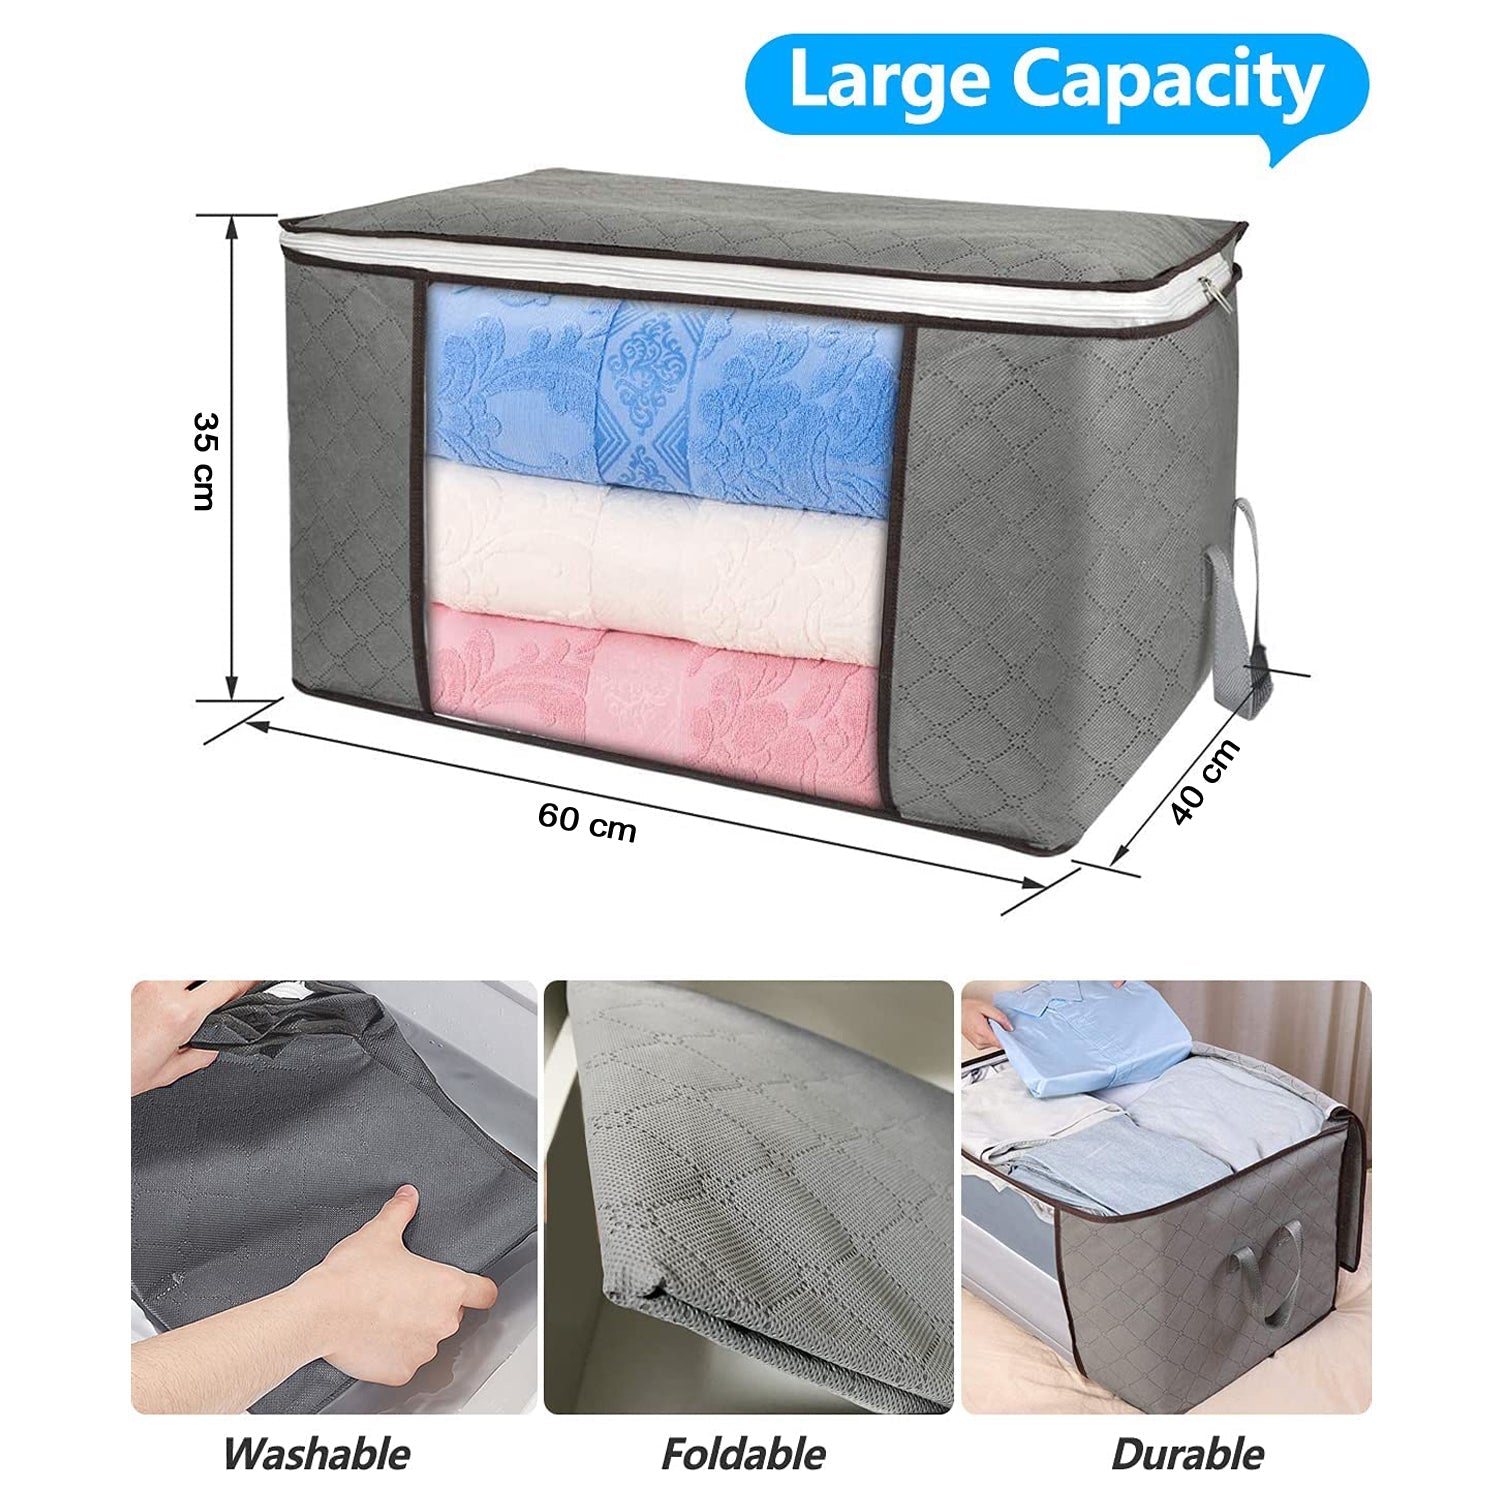 6111 Travelling Storage Bag used in storing all types cloths and stuffs for travelling purposes in all kind of needs. DeoDap